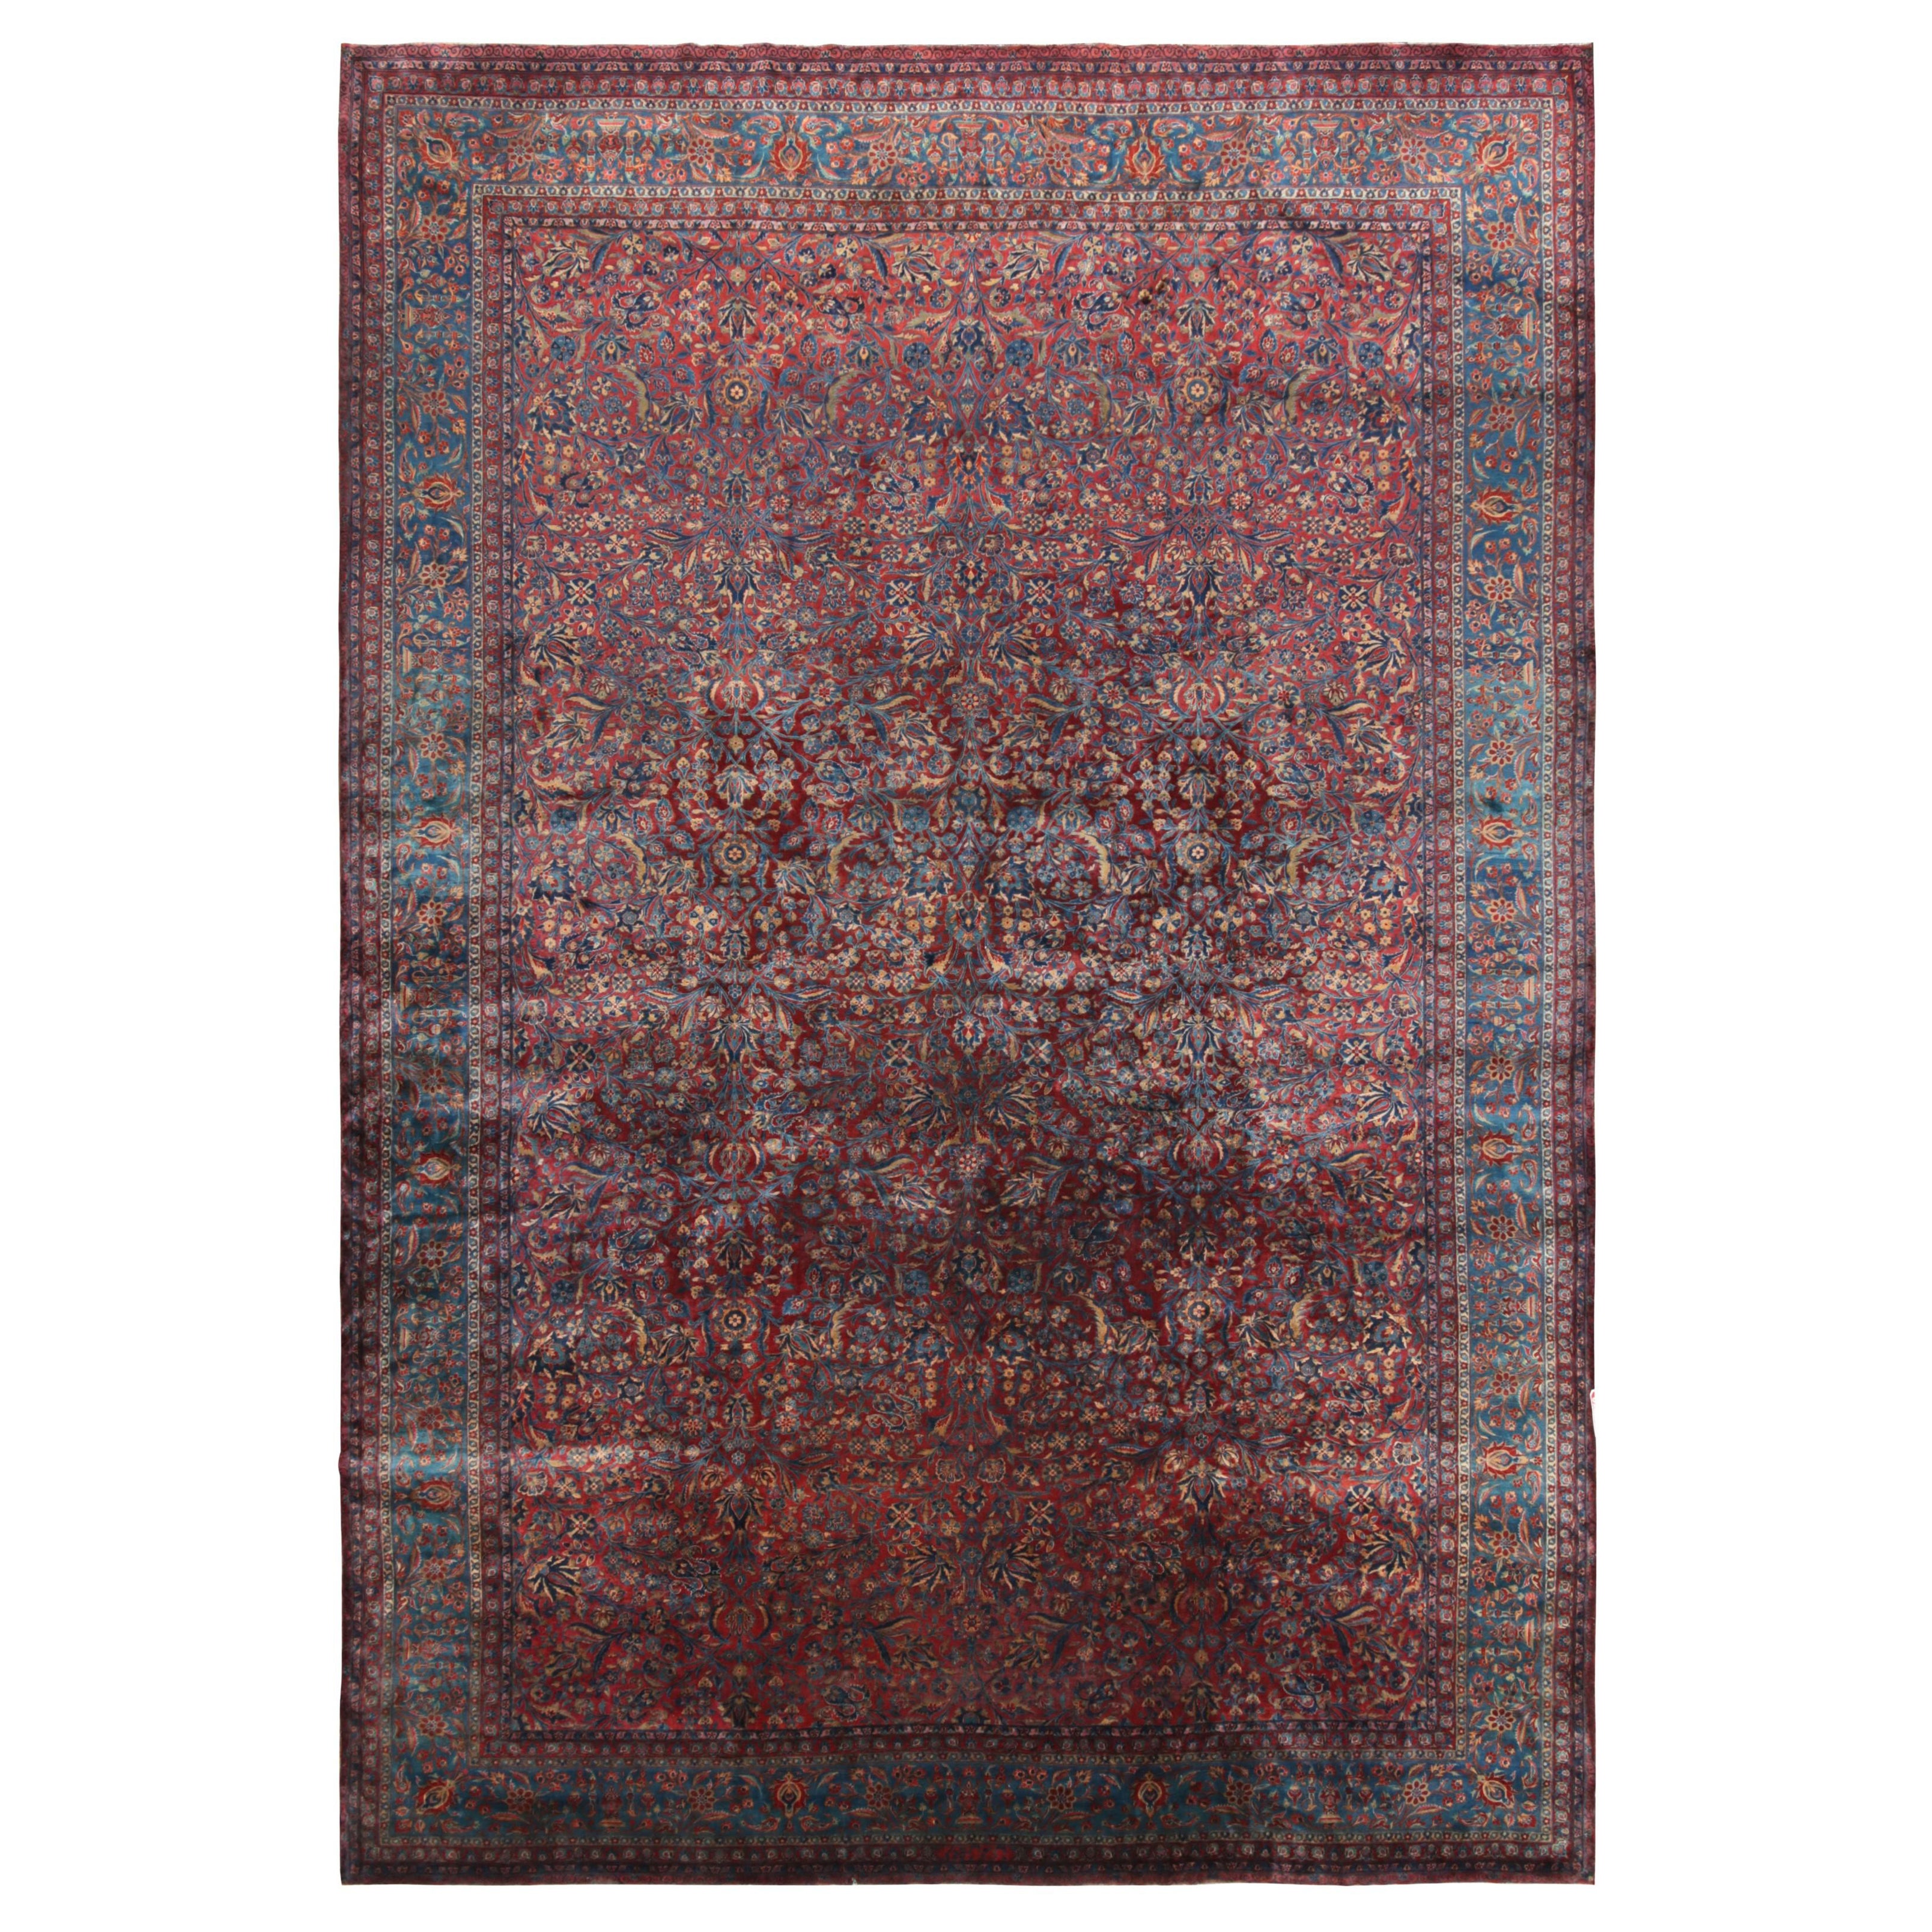 Antique Persian Kashan Rug with Red-Blue Floral Patterns by Rug & Kilim For Sale